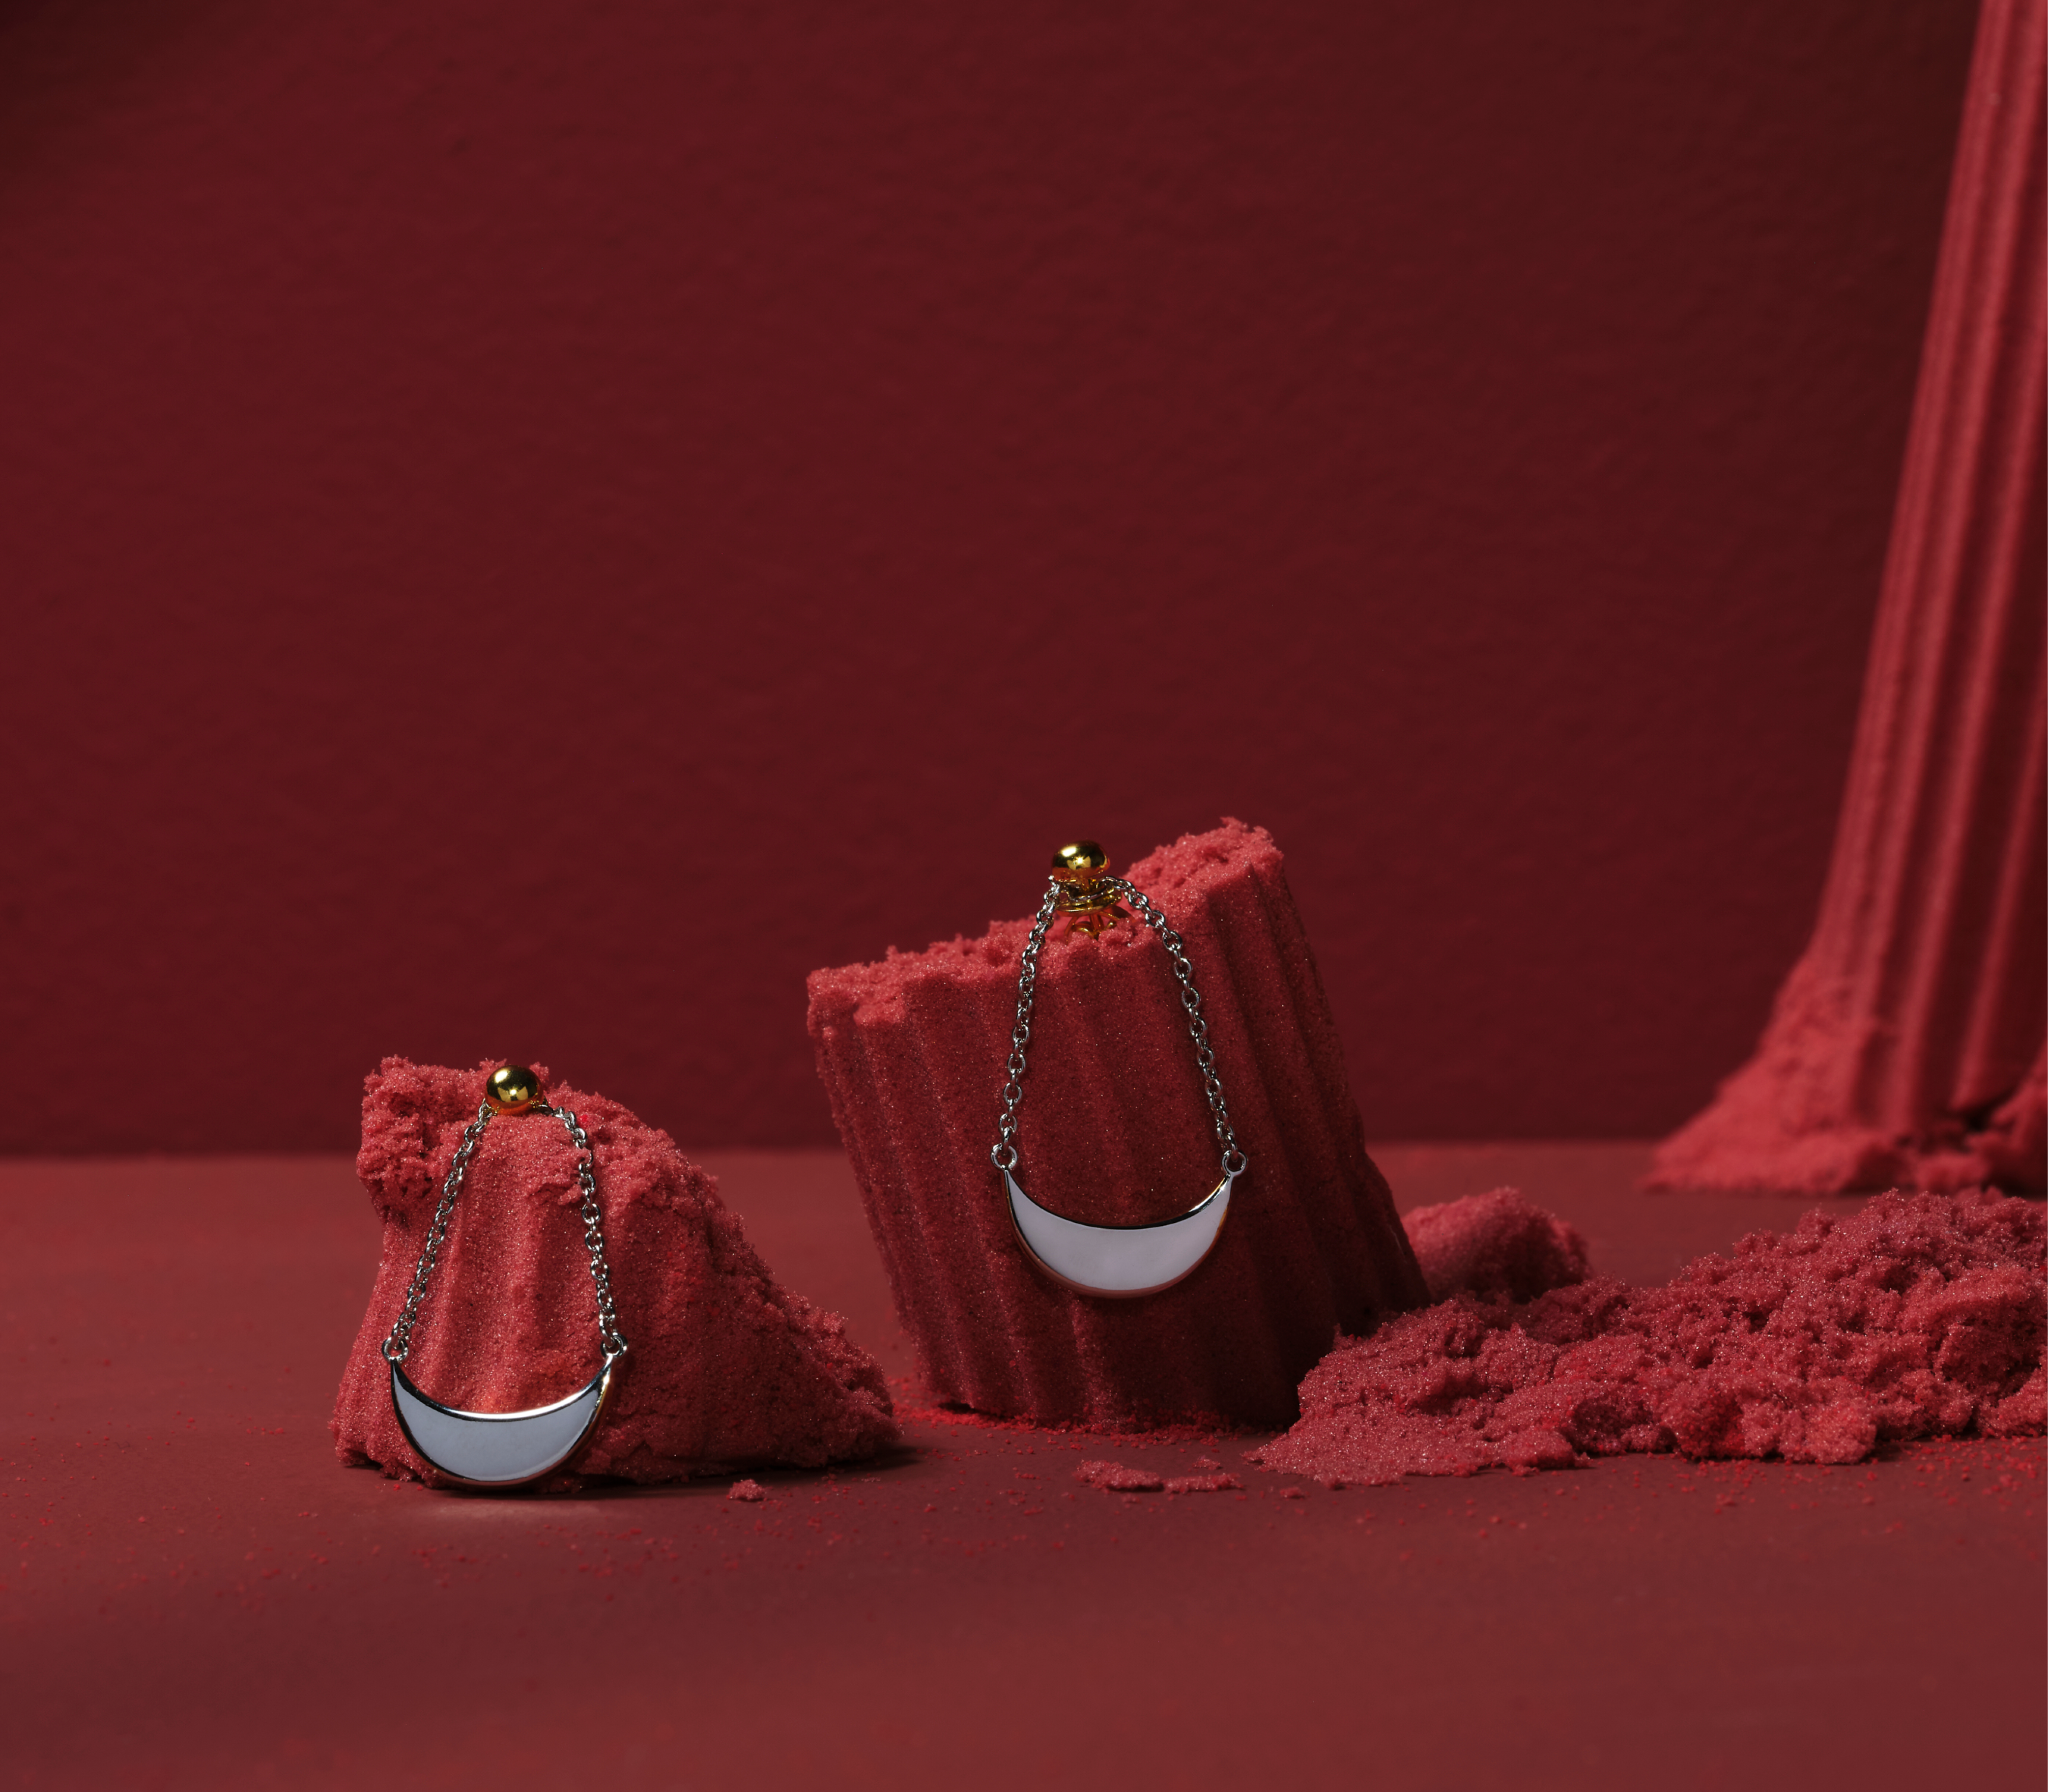 A pair of earrings are hung in front of a red background. The earrings have 2 dainty chains holding a half crescent moon.